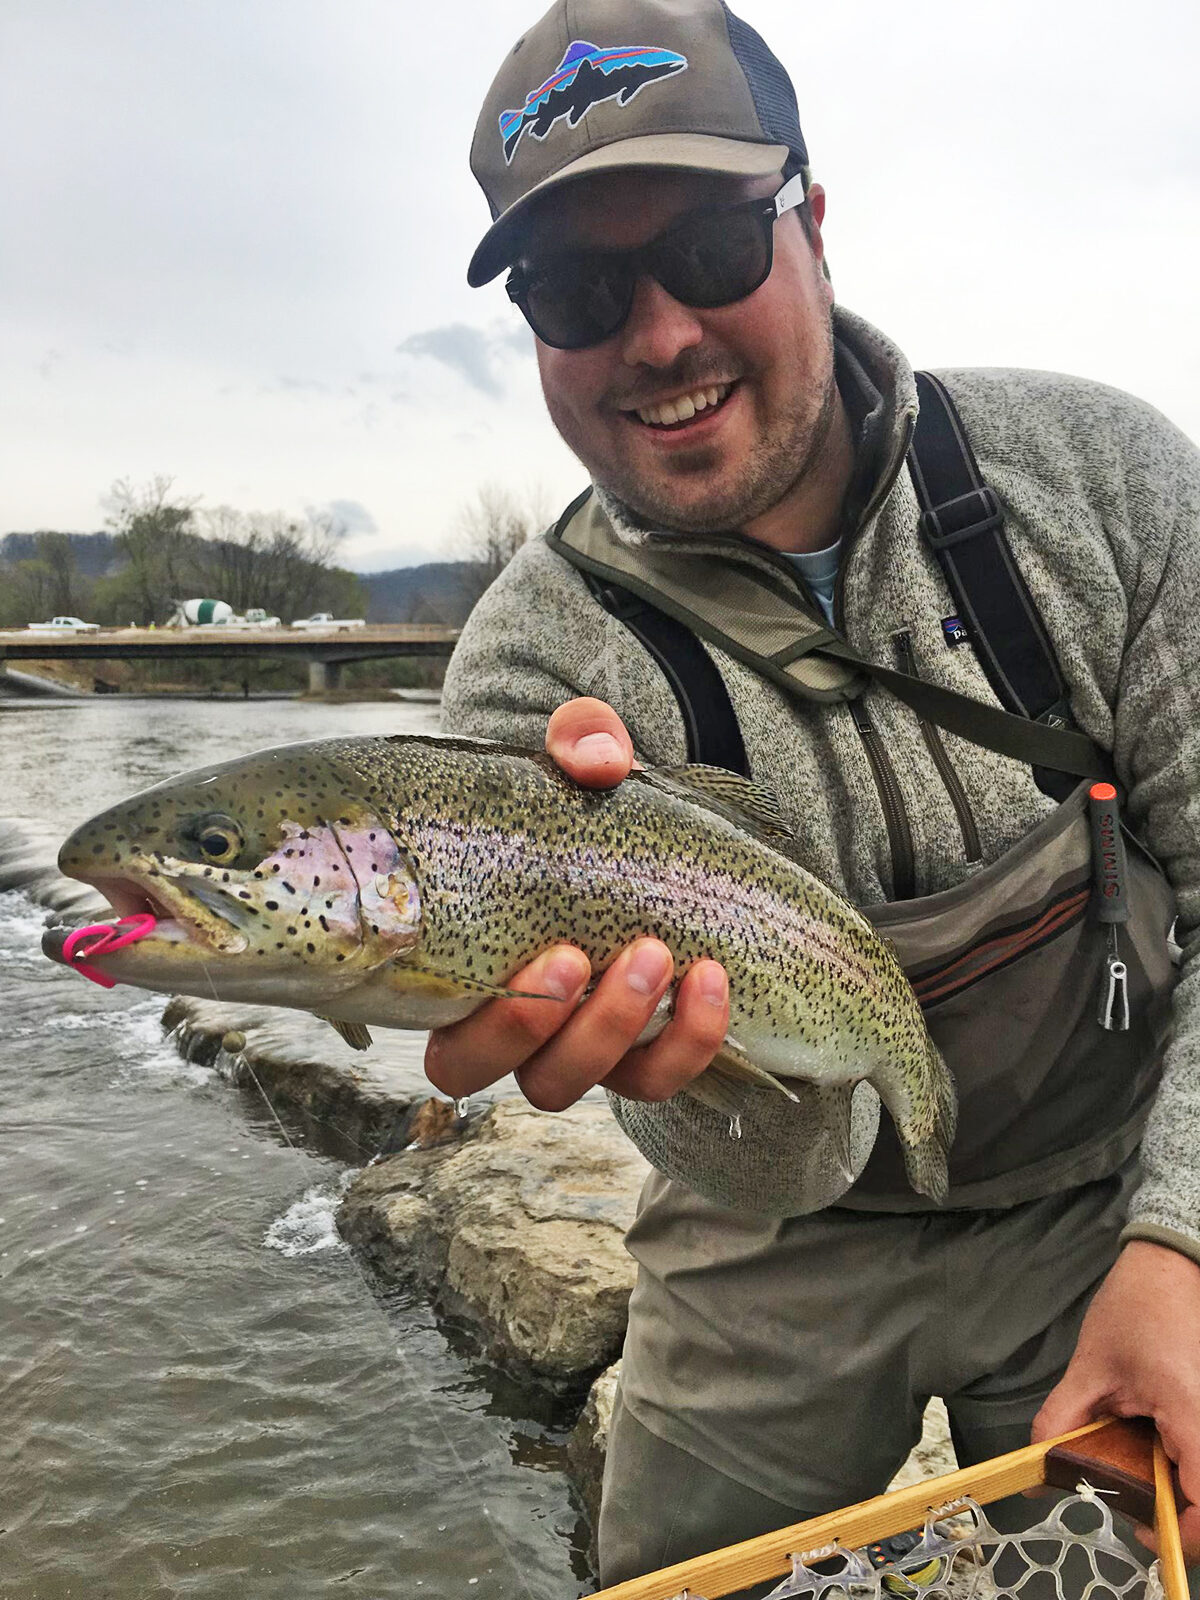 A man smiles at the camera while holding a rainbow trout in one hand.